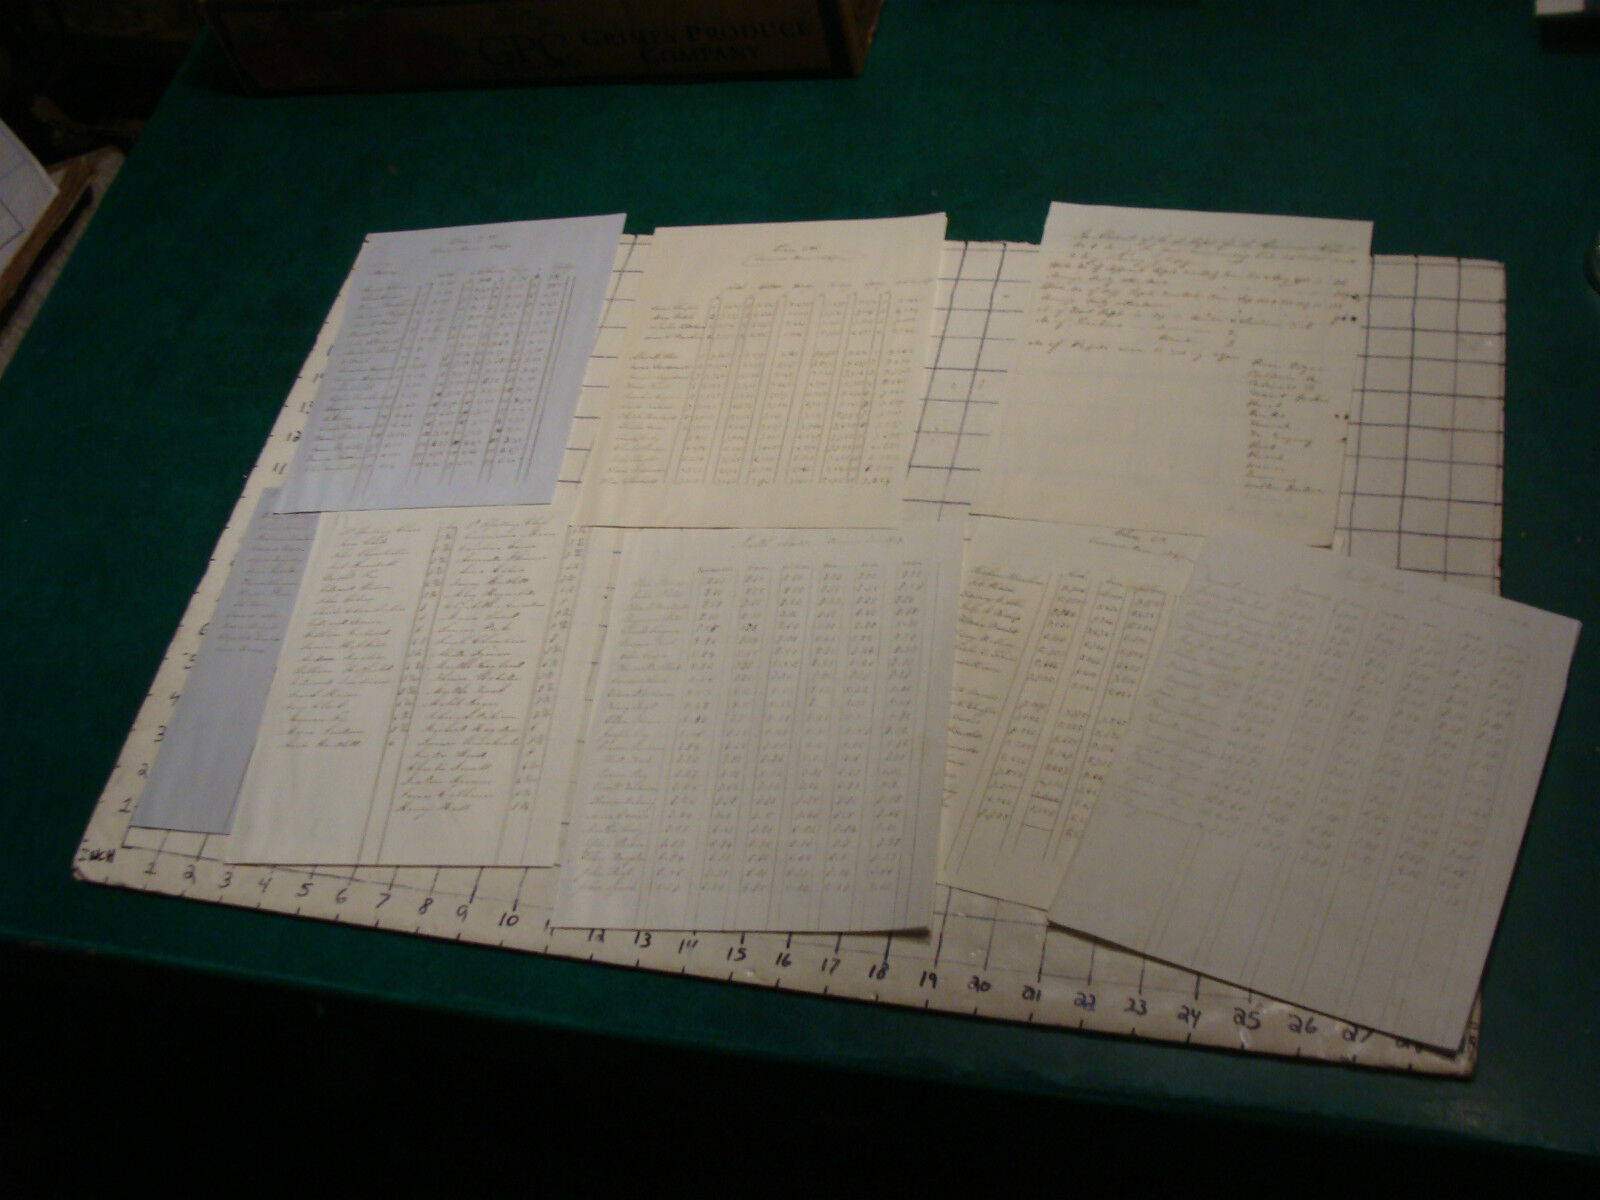 Original SPRINGFIELD MA. 8 pages of childrens grades, 1849 hand written pages